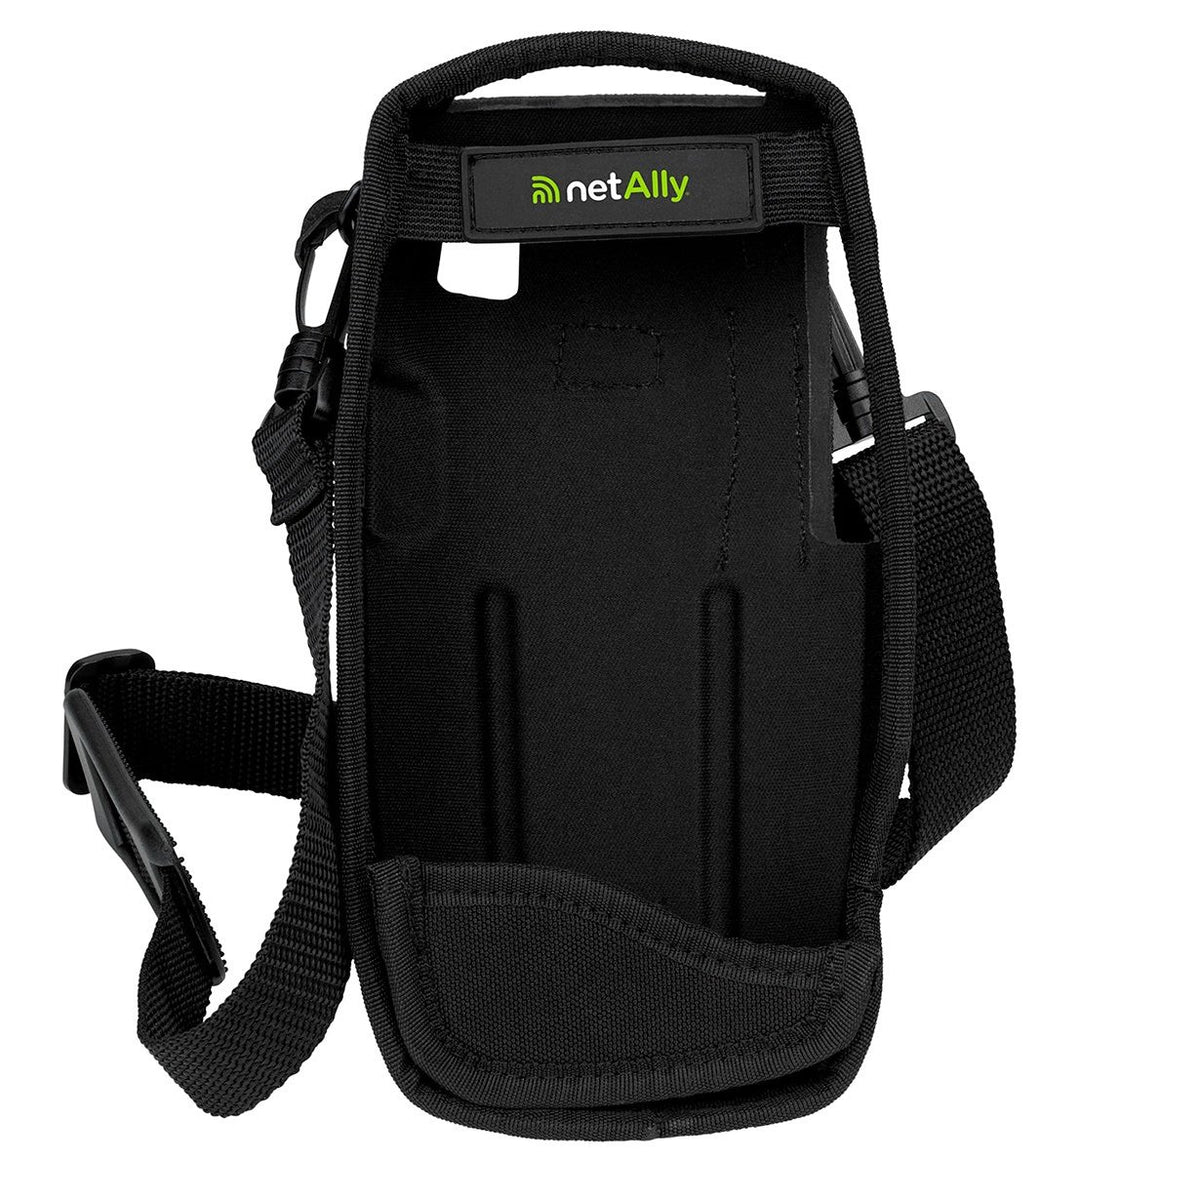 NetAlly Protective Carrying Holster with shoulder strap for use with LinkRunner G2, Aircheck G2 TEST NetAlly Idbf121b7c404cd3fee48ca1eb9c9161a94c2cdd9